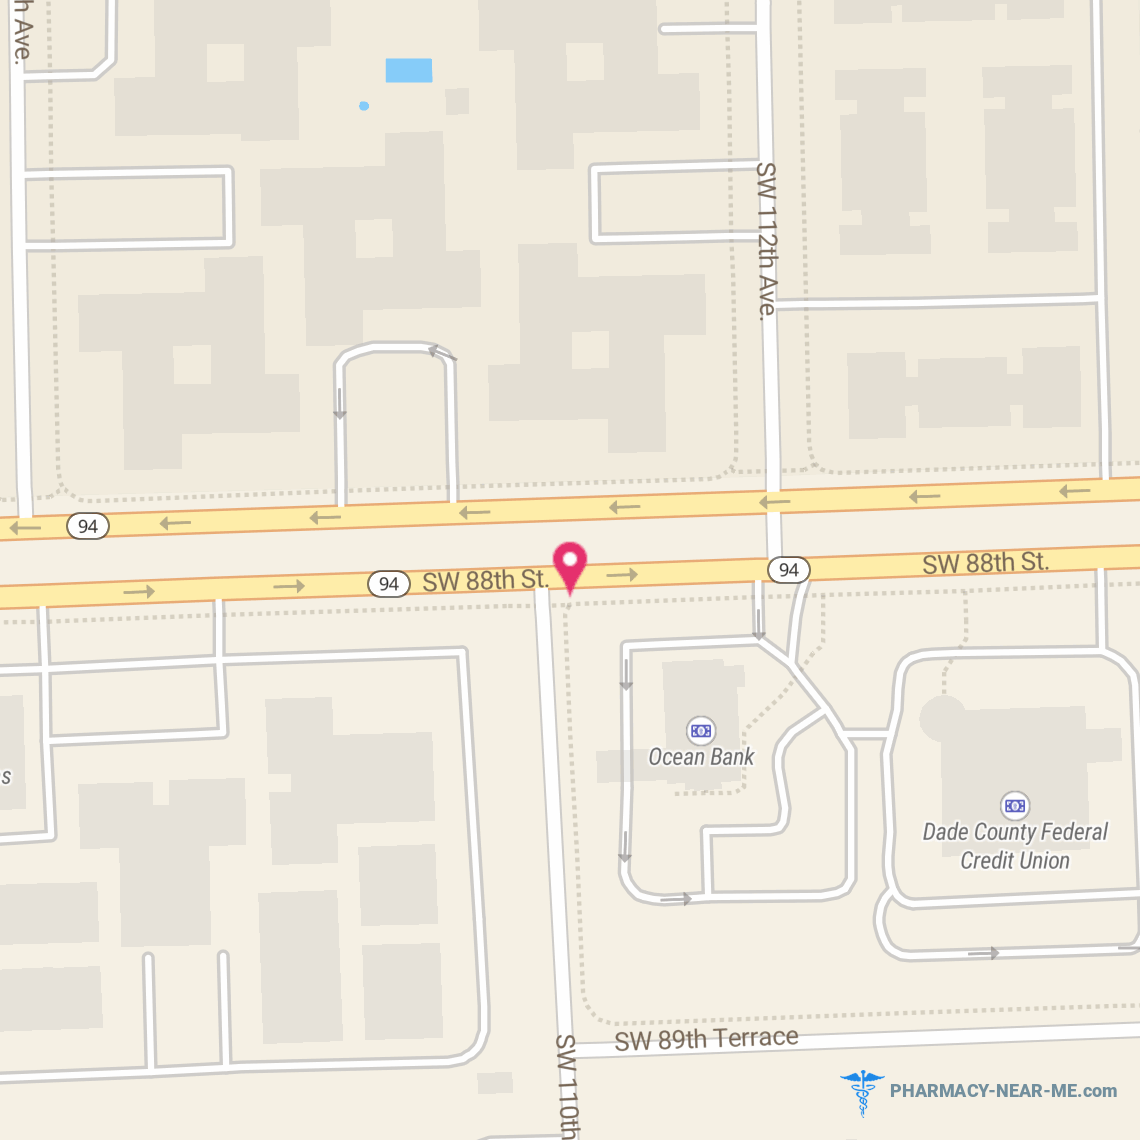 WALGREENS #07458 - Pharmacy Hours, Phone, Reviews & Information: 11190 SW 88th St, Kendall, Florida 33176, United States